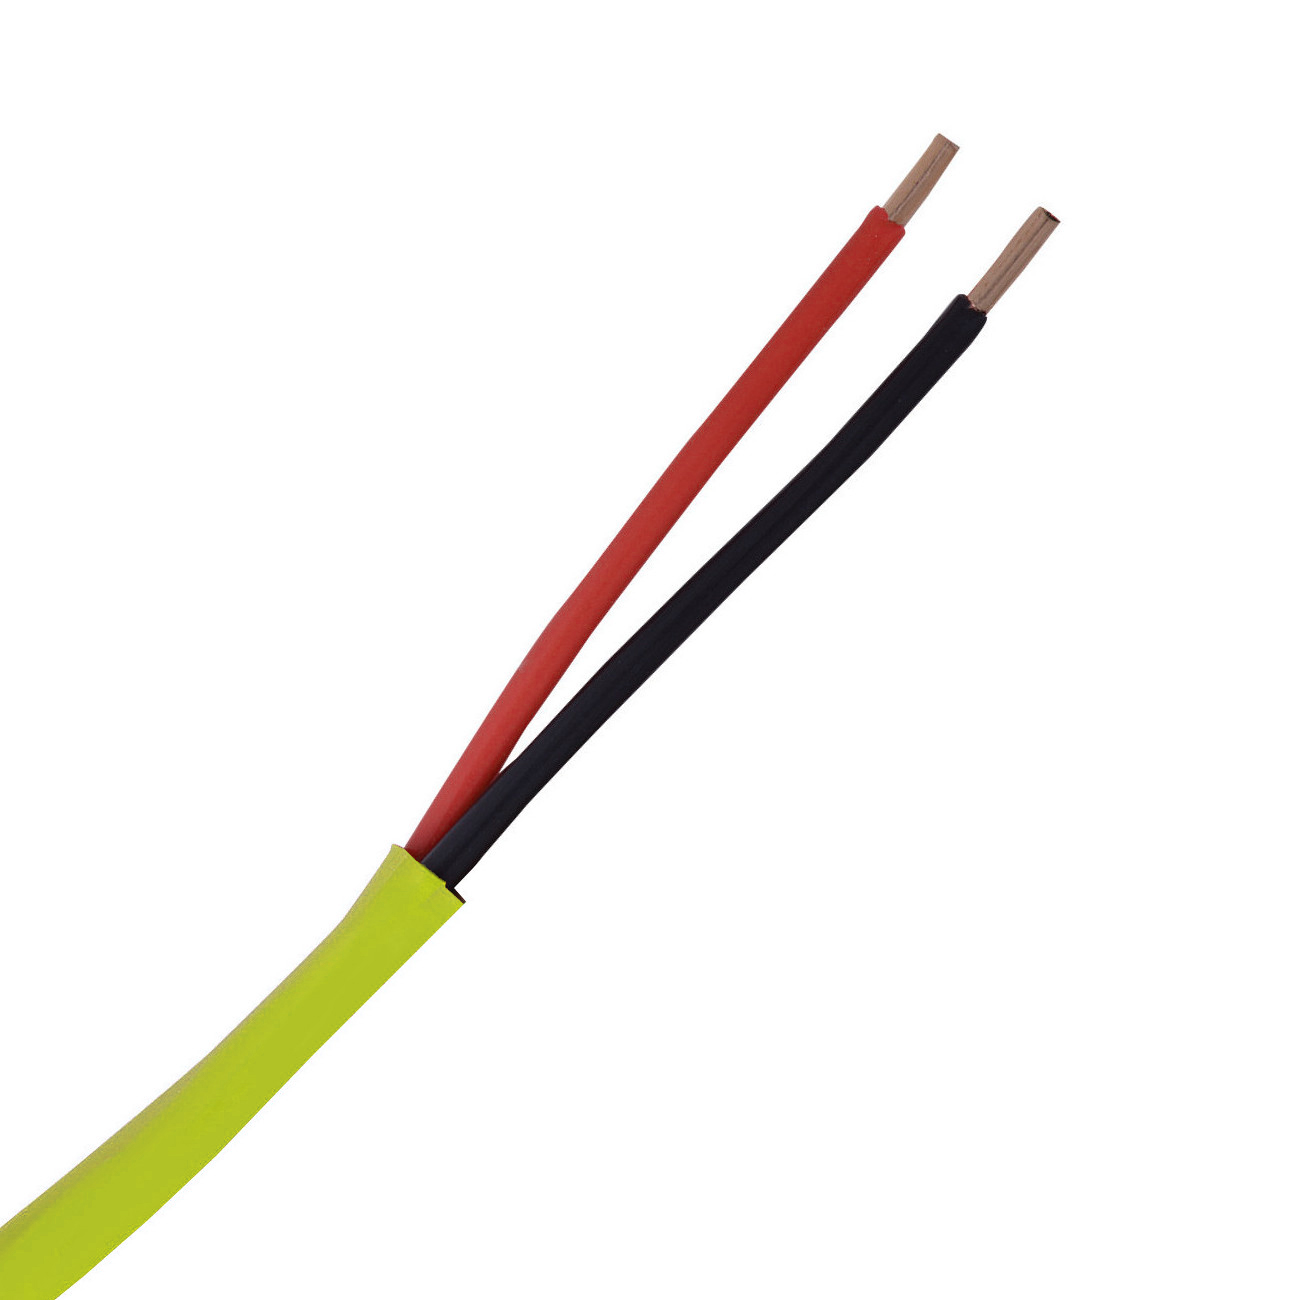 159632YL - Fire Alarm Wire - Yellow -14 AWG/2 Cond, Plenum (FPLP), Unshielded, Solid Bare Copper, 1000ft